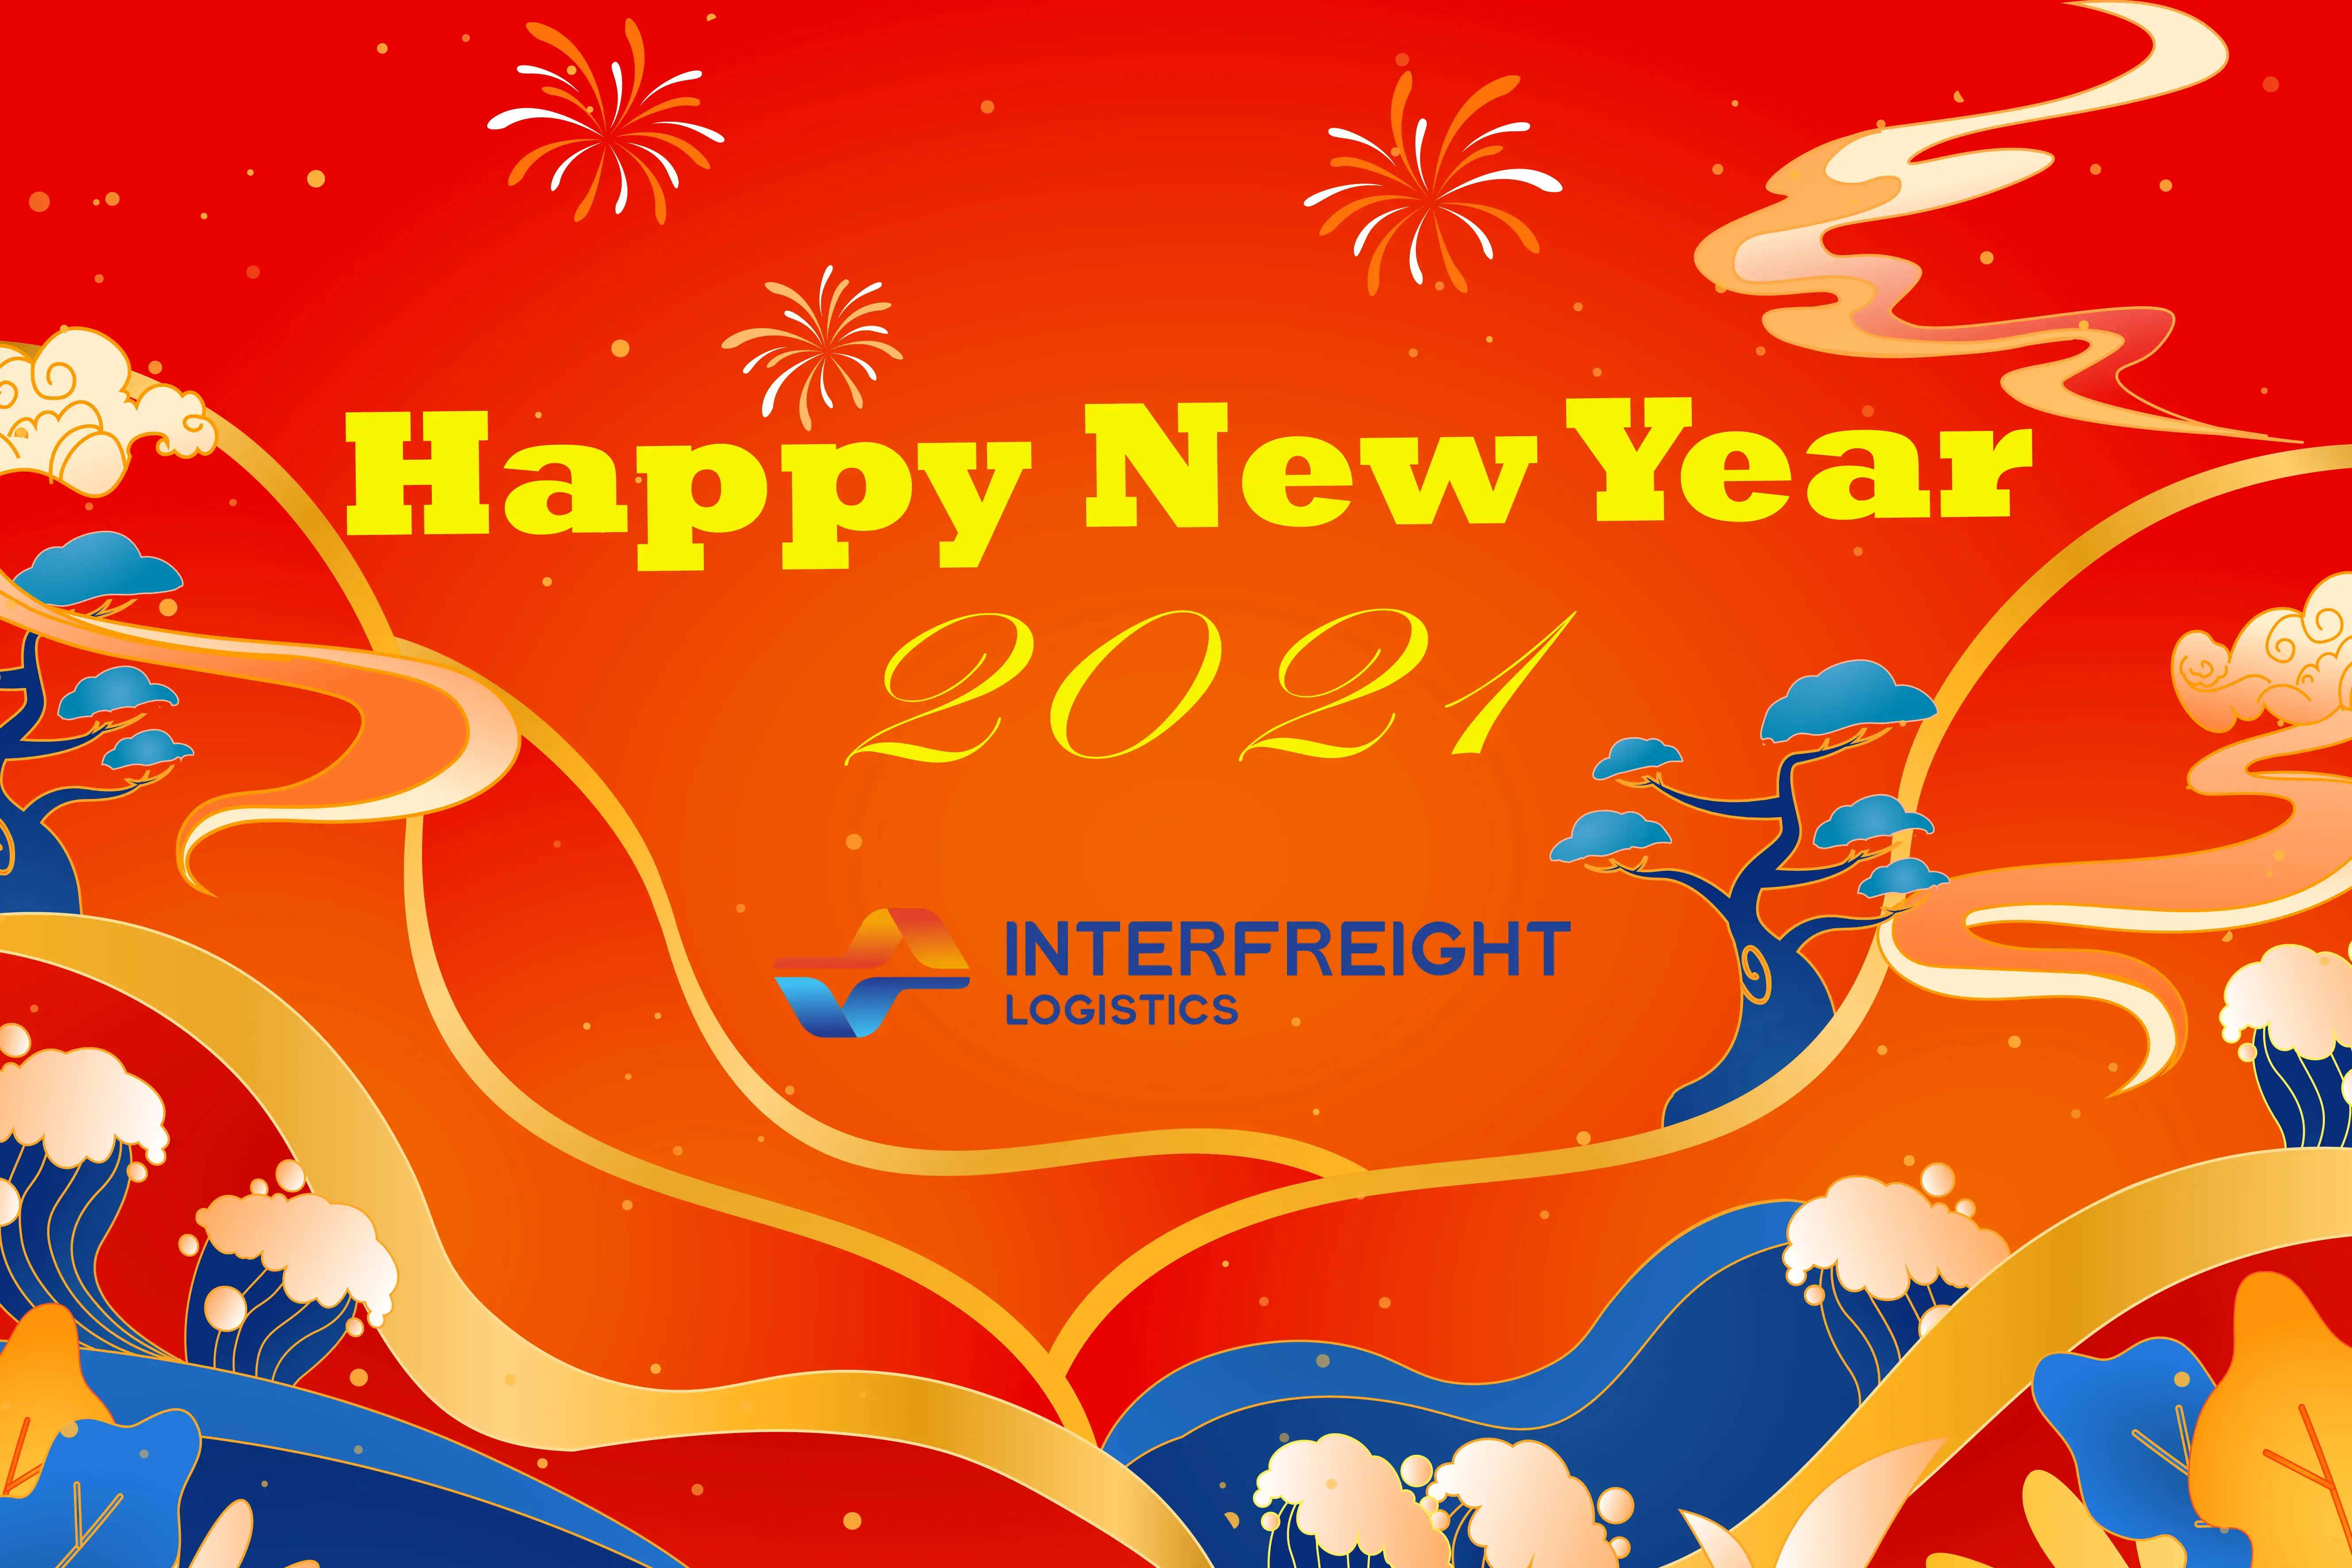 Happy New Year from Interfreight